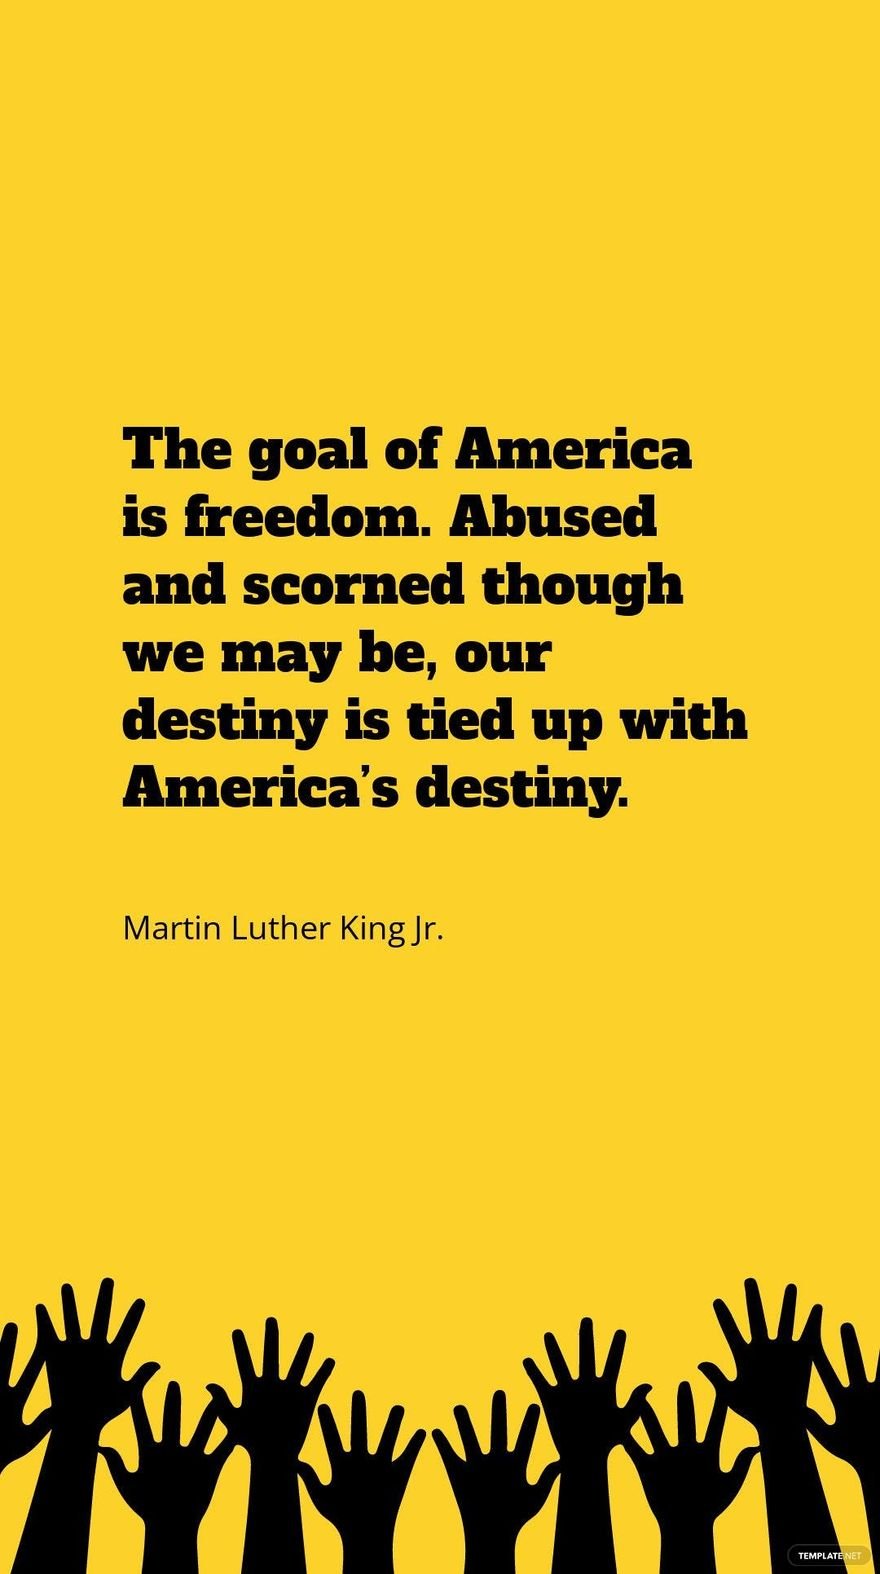 Martin Luther King Jr. - The goal of America is freedom. Abused and scorned though we may be, our destiny is tied up with America’s destiny.